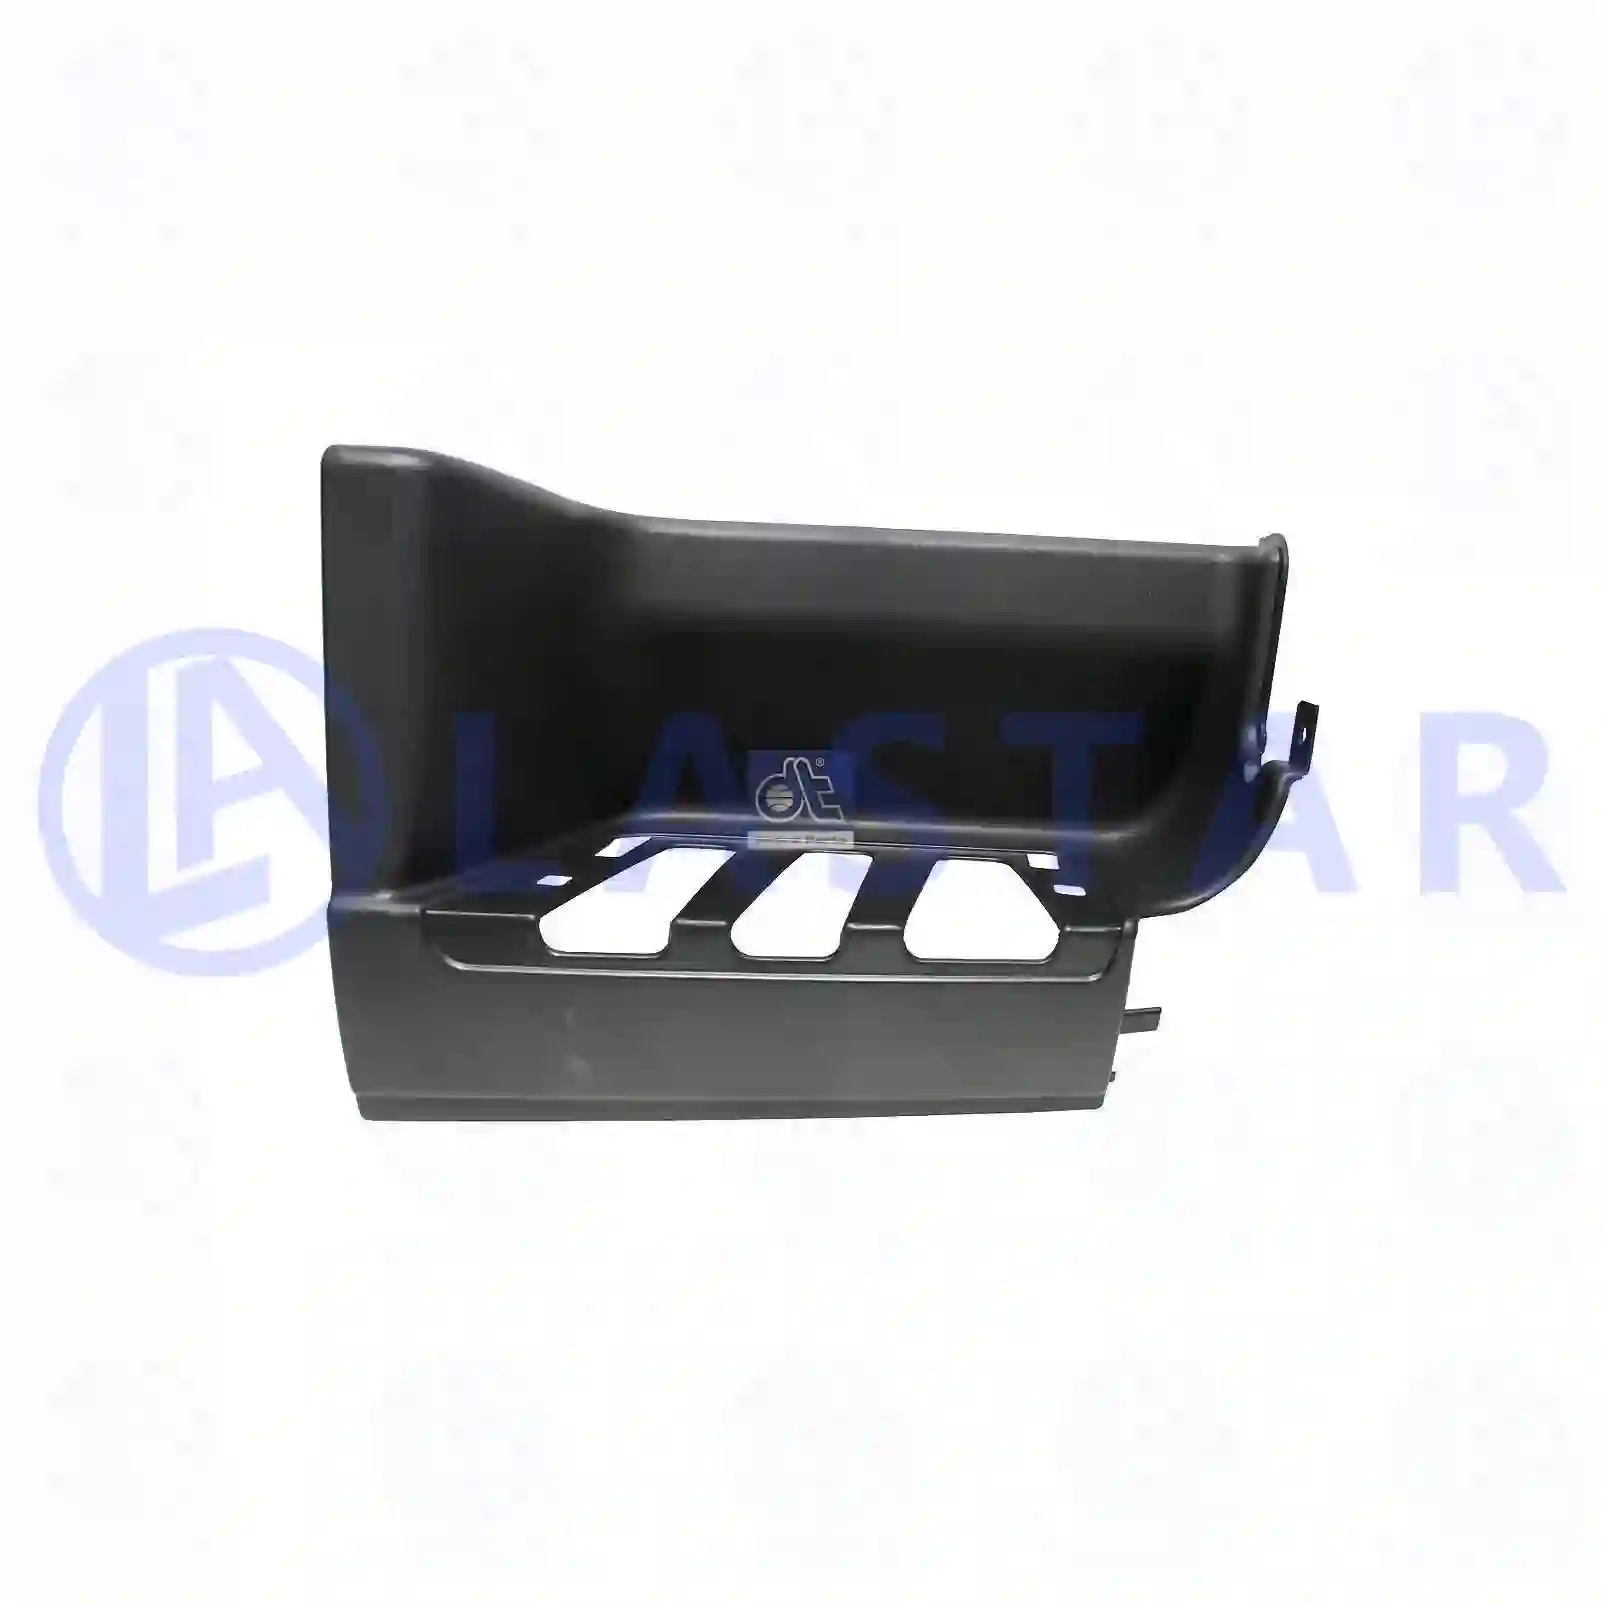 Step well case, right, 77718120, 20529640, 3175407, ZG61214-0008 ||  77718120 Lastar Spare Part | Truck Spare Parts, Auotomotive Spare Parts Step well case, right, 77718120, 20529640, 3175407, ZG61214-0008 ||  77718120 Lastar Spare Part | Truck Spare Parts, Auotomotive Spare Parts